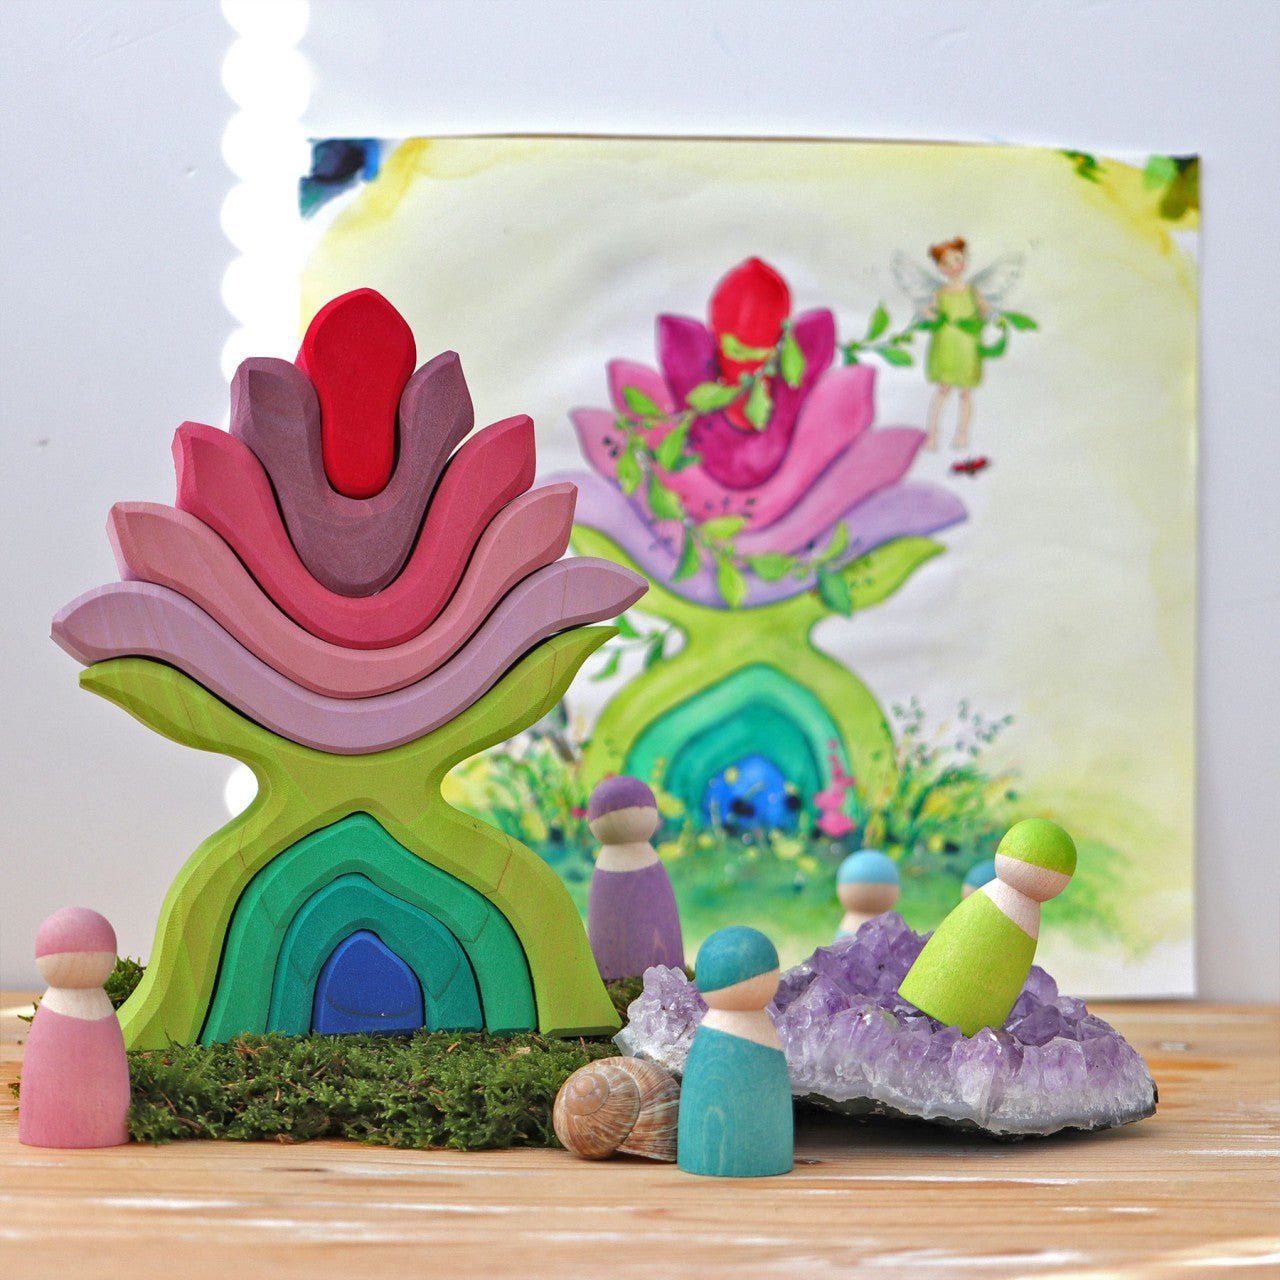 GRIMM'S | STACKING FLOWER by GRIMM'S WOODEN TOYS - The Playful Collective